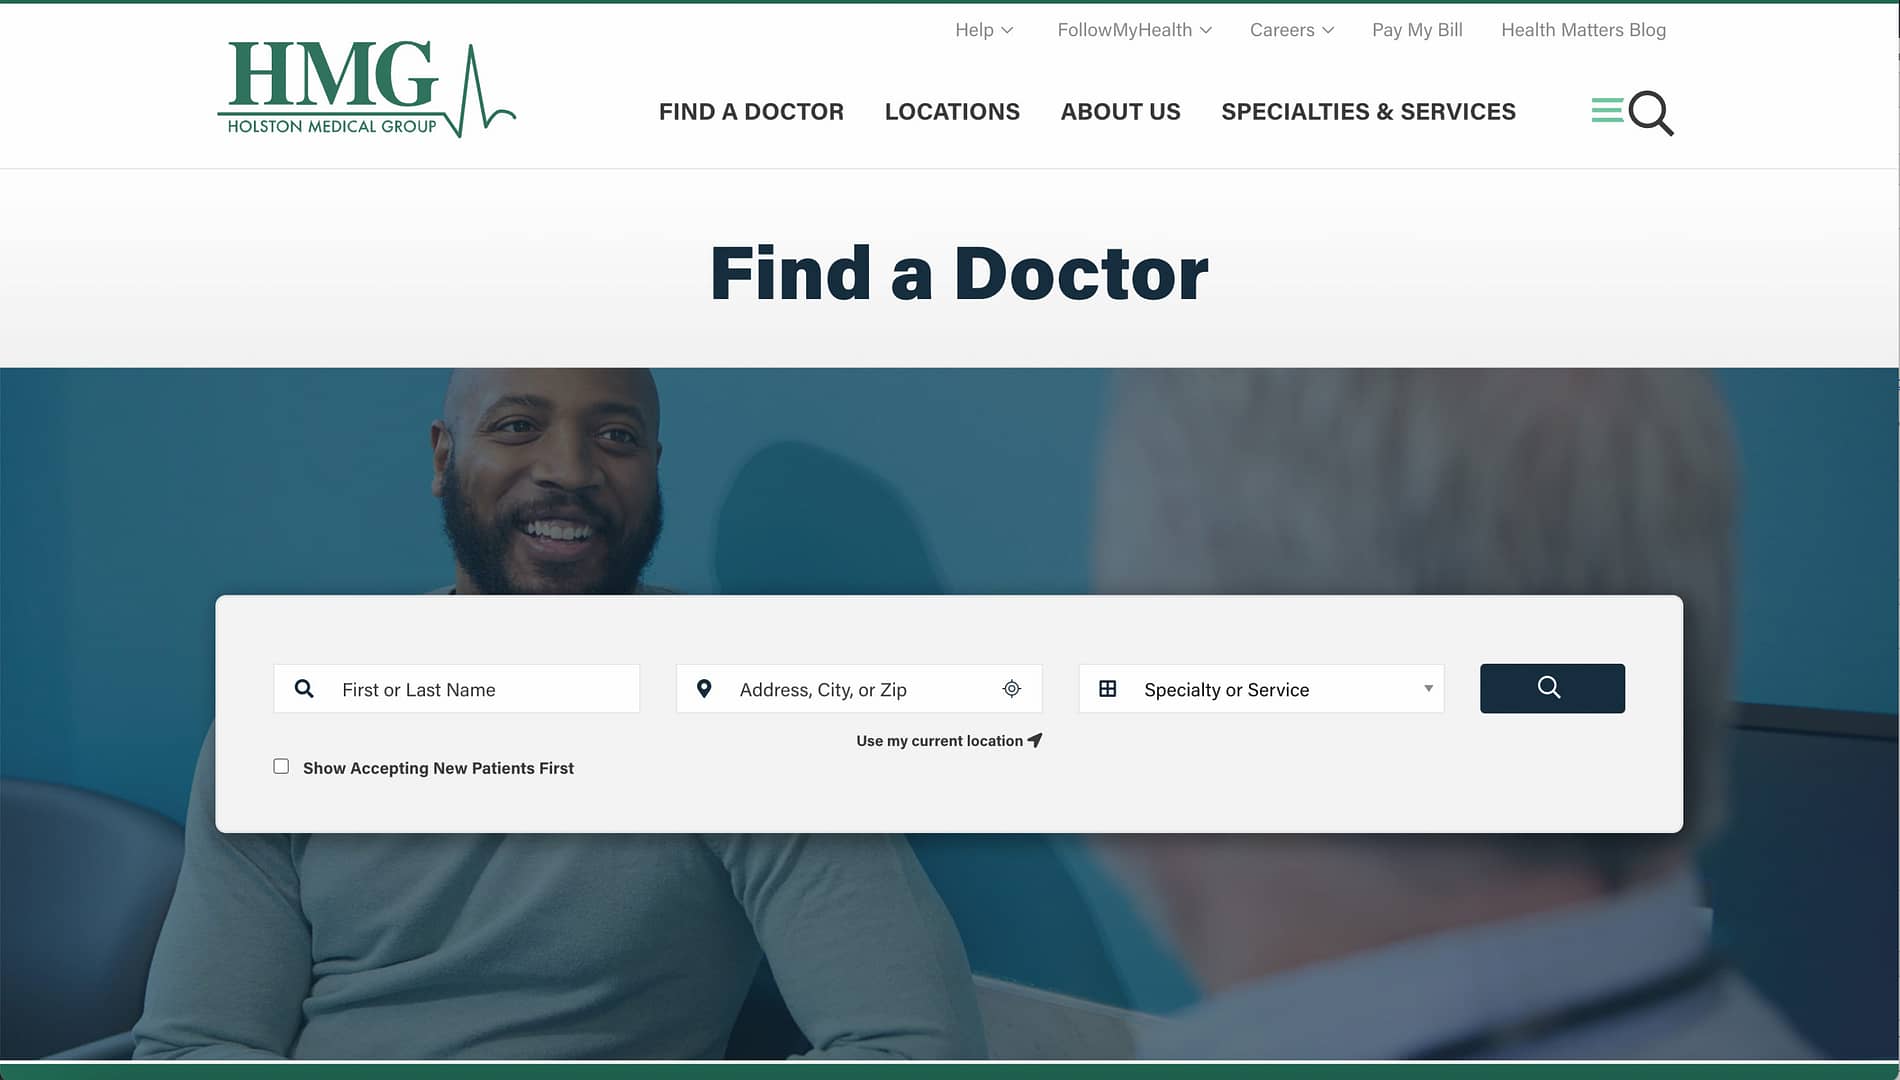 HMG Find A Doctor search